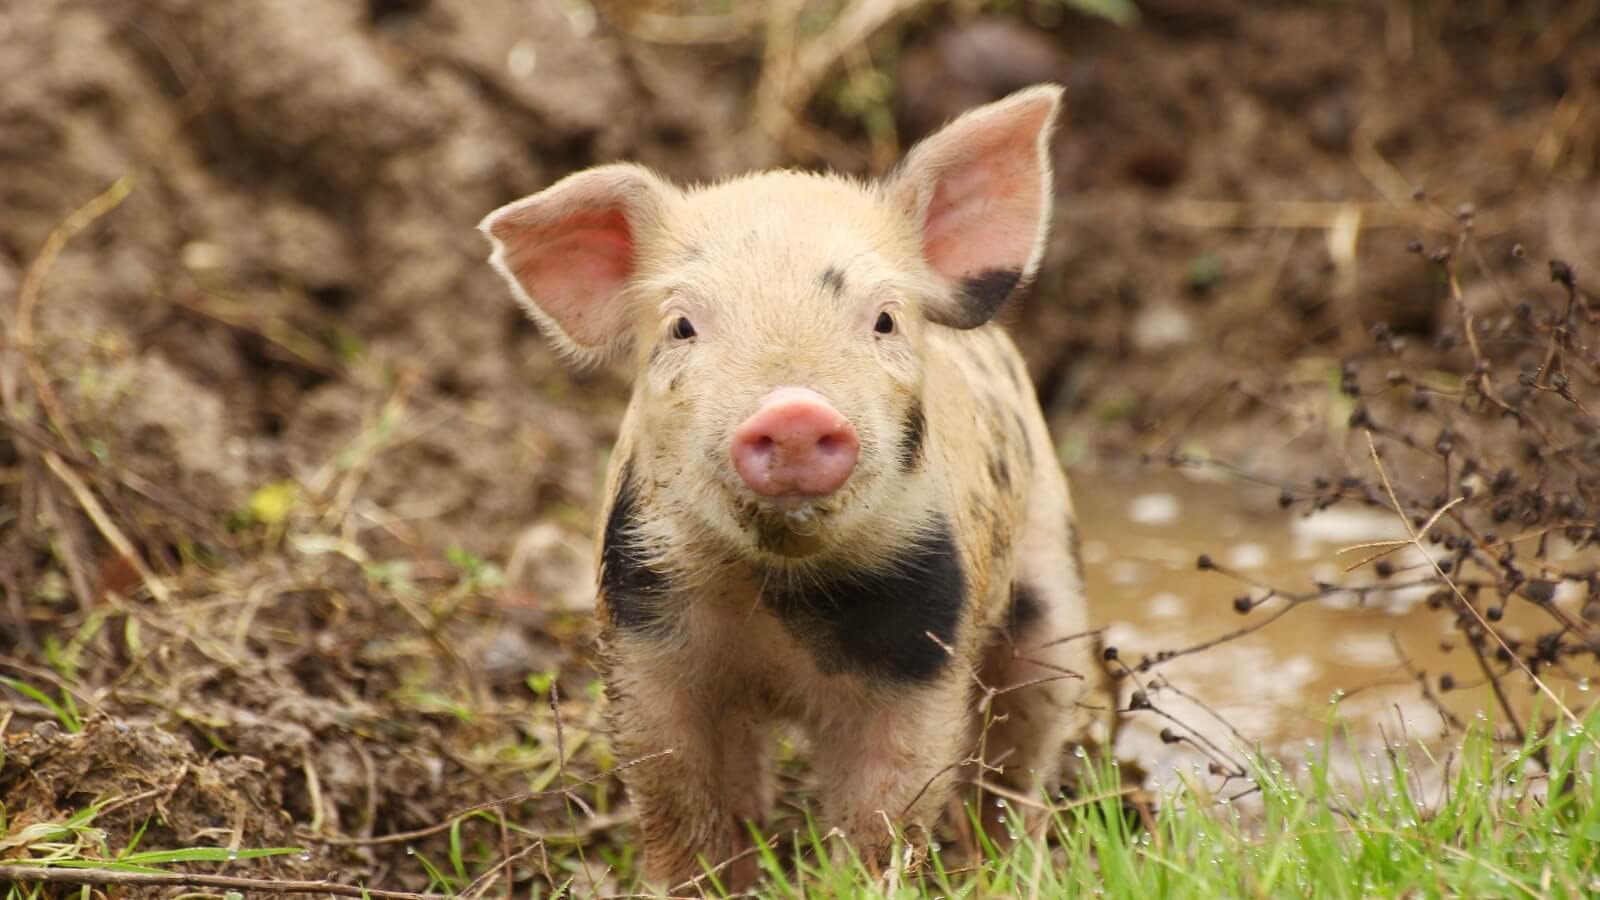 A young pig with black spots looking at the camera